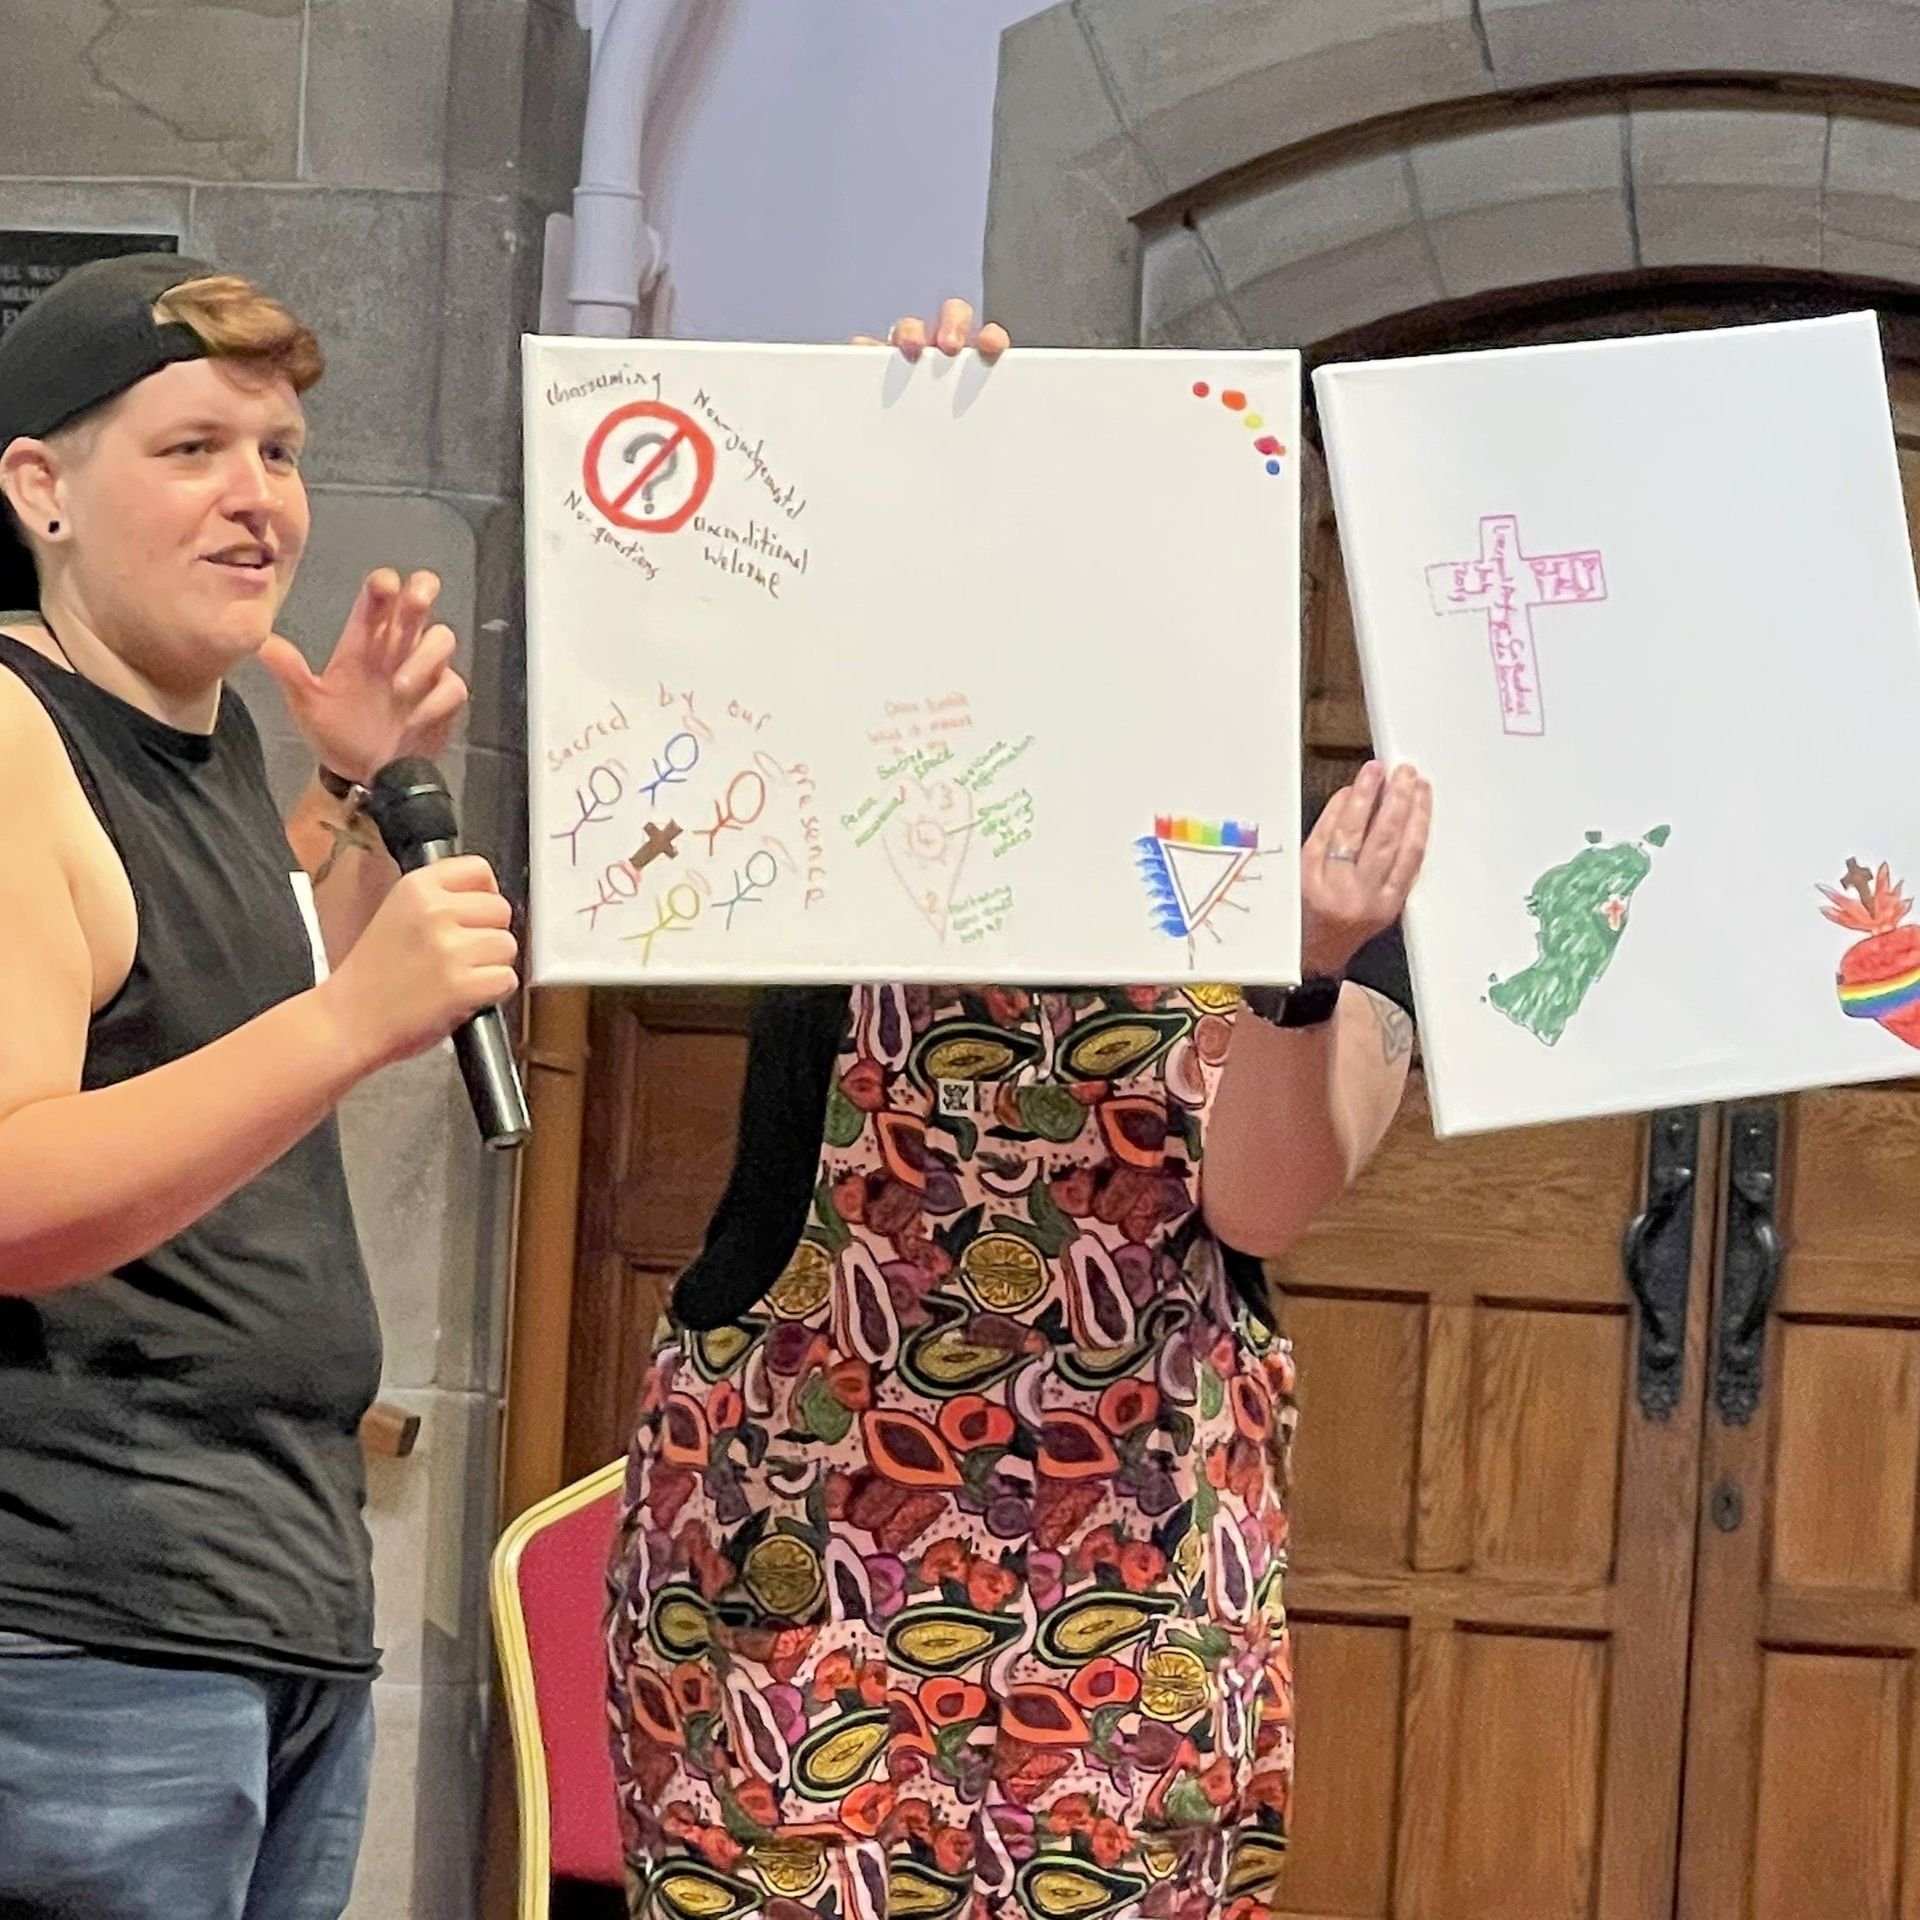  PhD student Peter Jones (left) presenting creative contributions to the ‘mapping sacred space’ breakout group at the Open Table Network national gathering in June 2022. Another person (right) holds up the creative contributions.  READ MORE.  